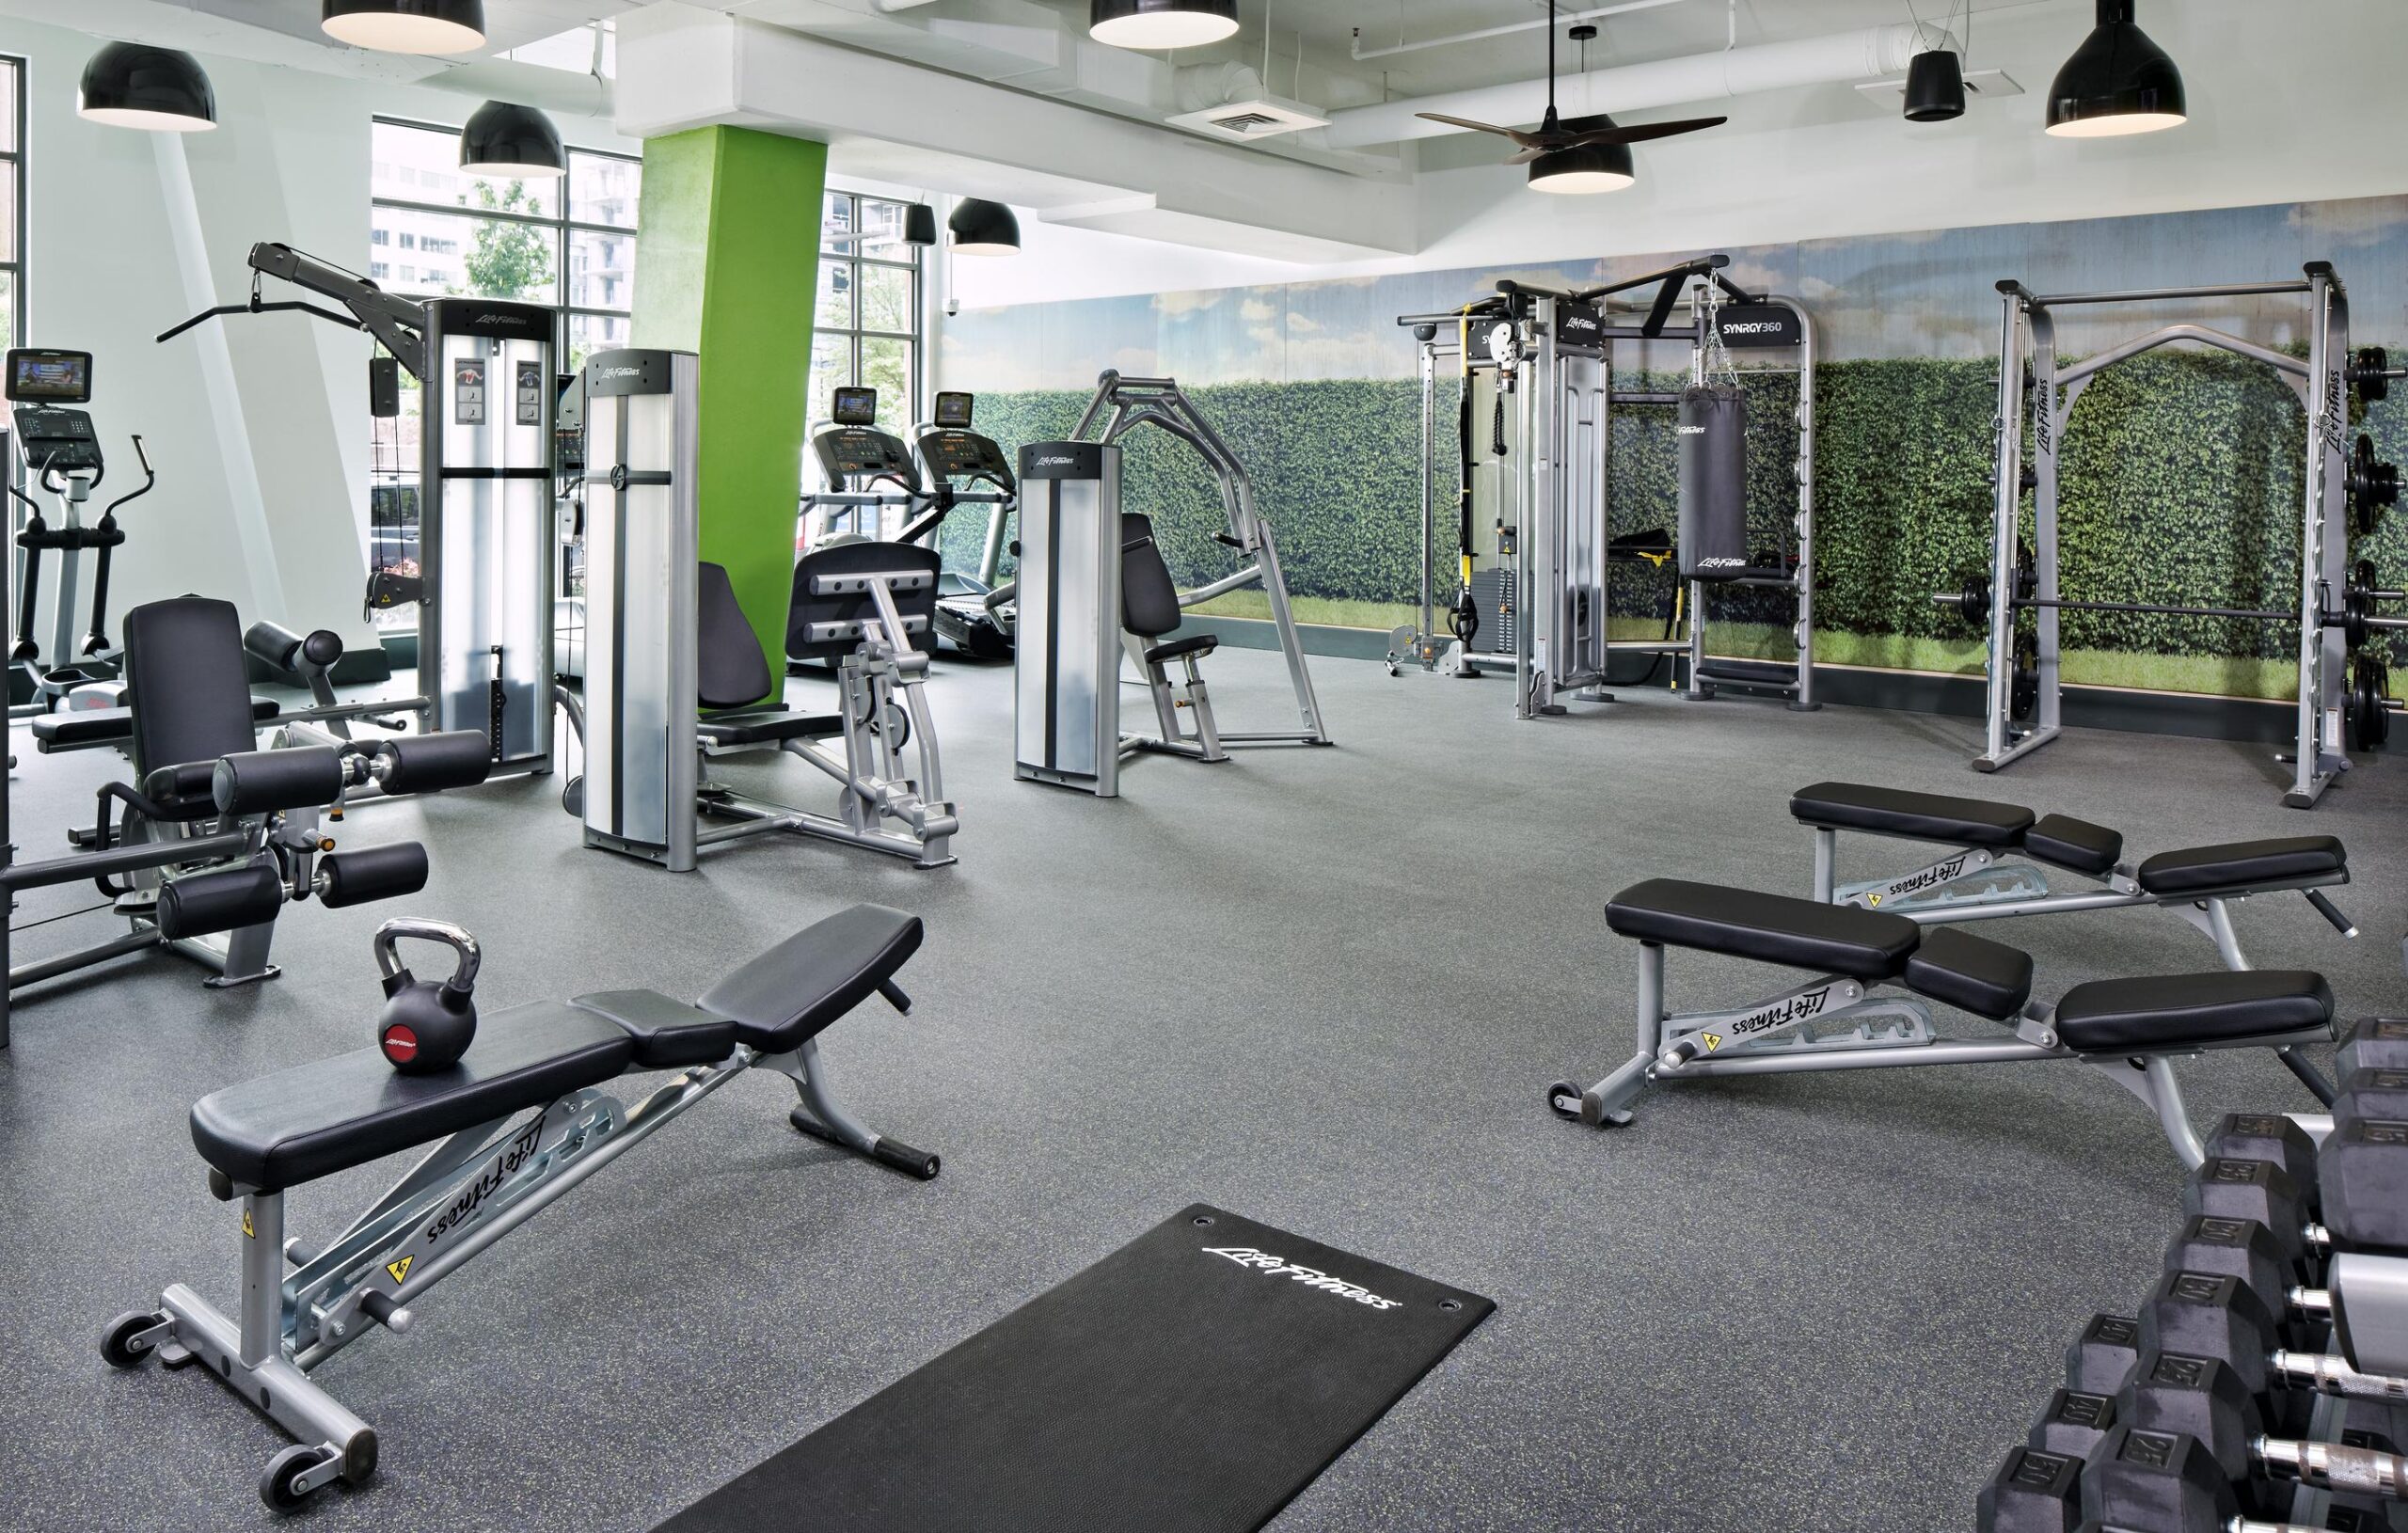 Fitness center at Parc Riverside with cardio and weight equipment